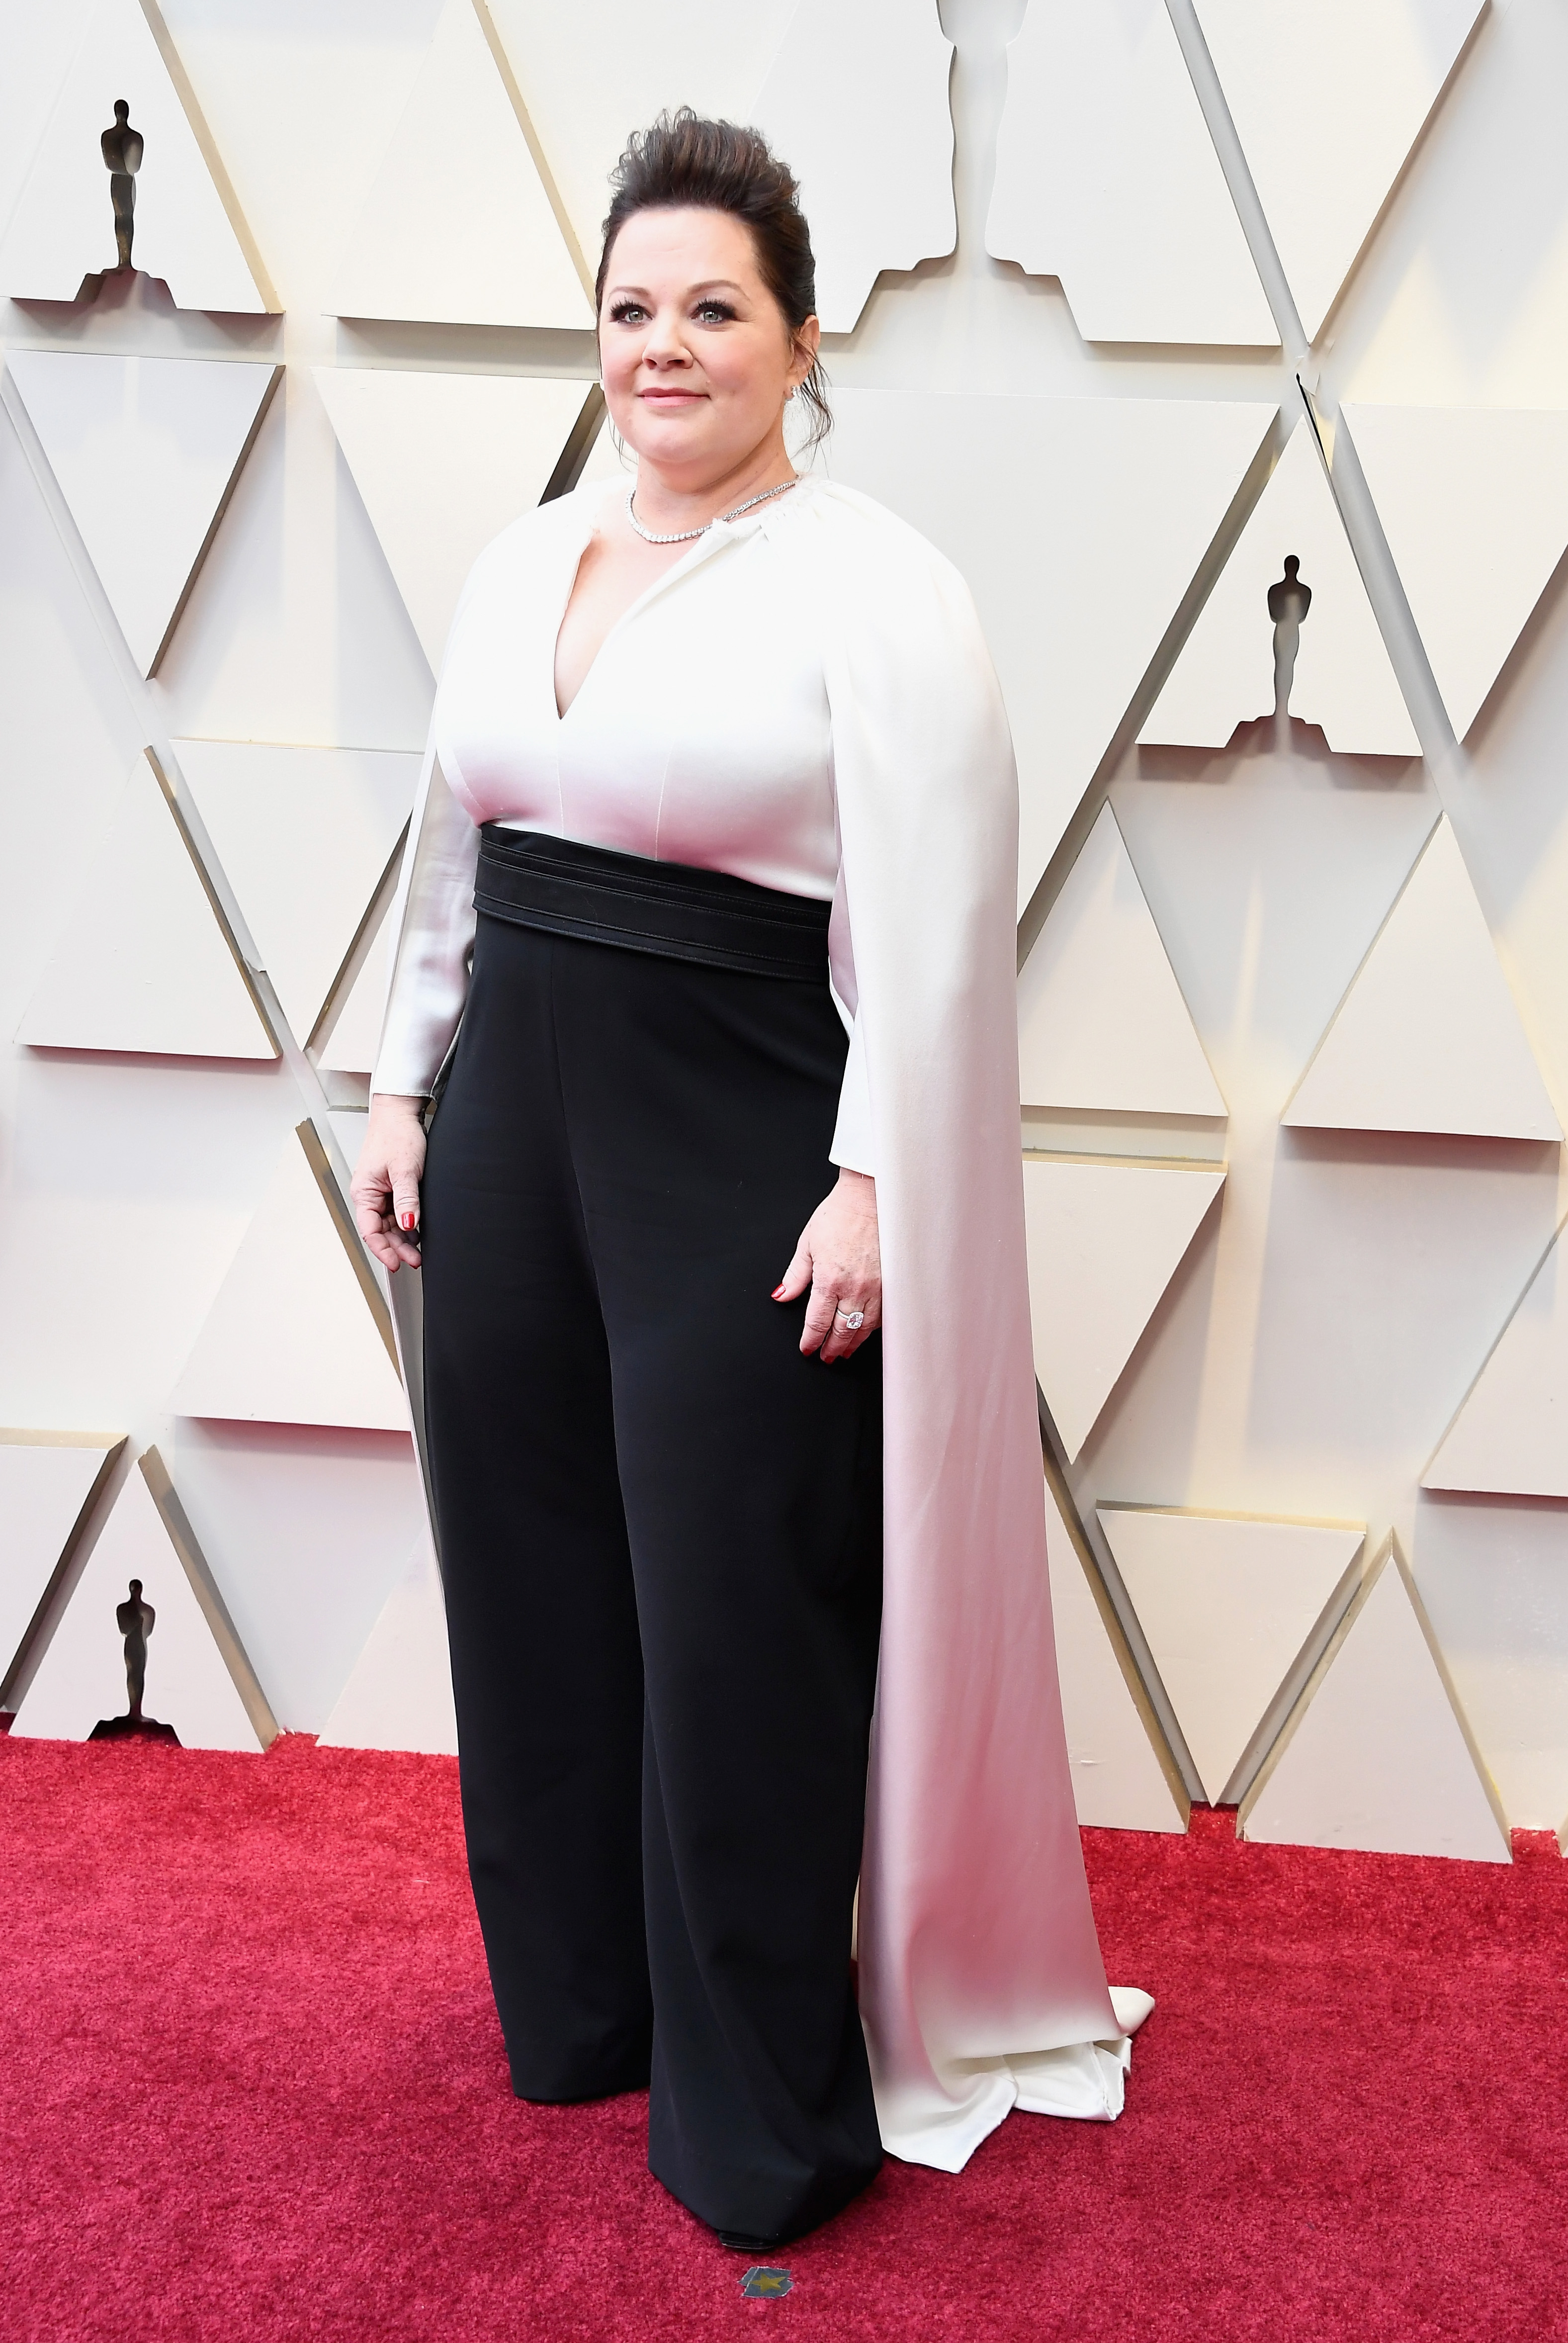 melissa mccarthy weight loss today